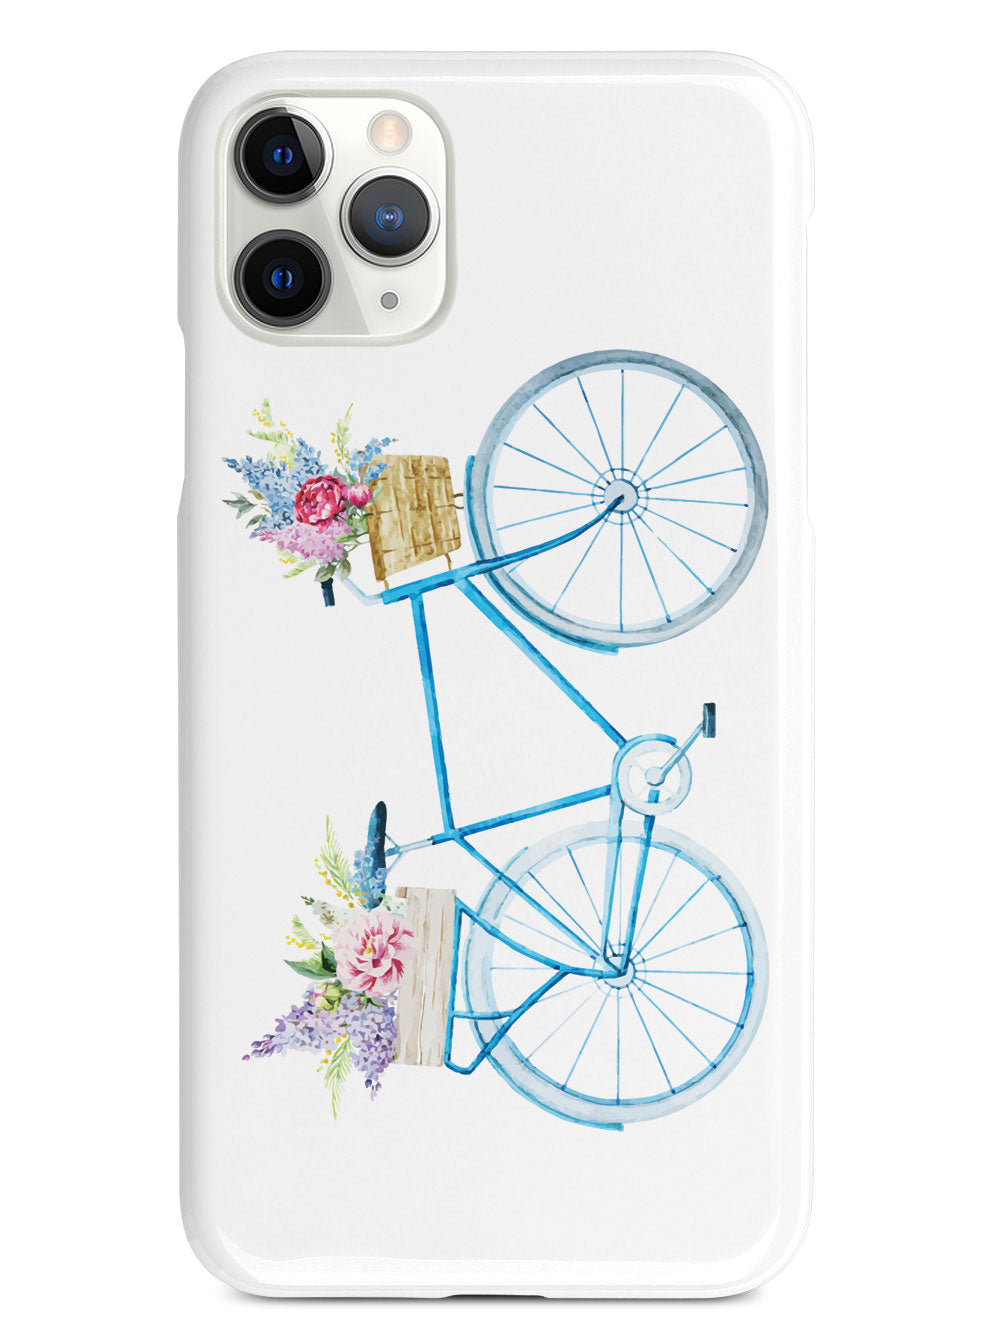 Basket of Flowers - Blue Bicycle - White Case